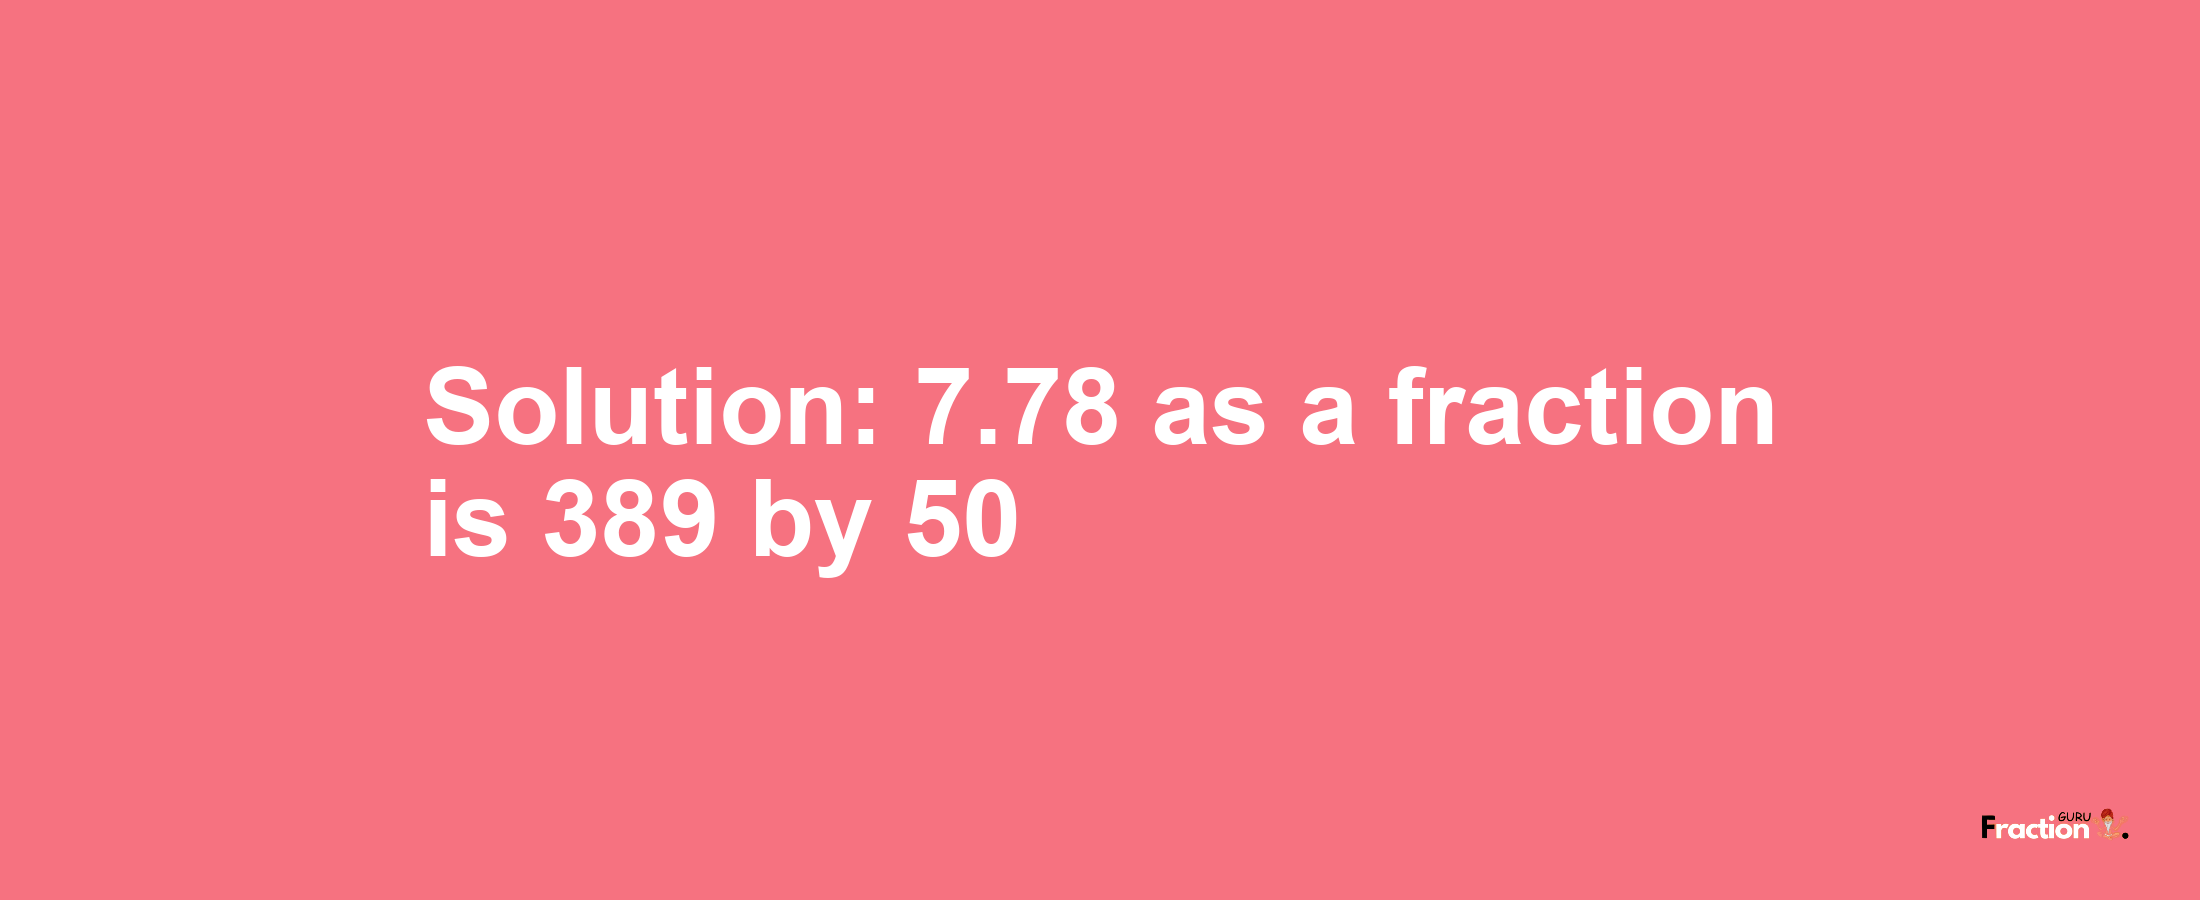 Solution:7.78 as a fraction is 389/50